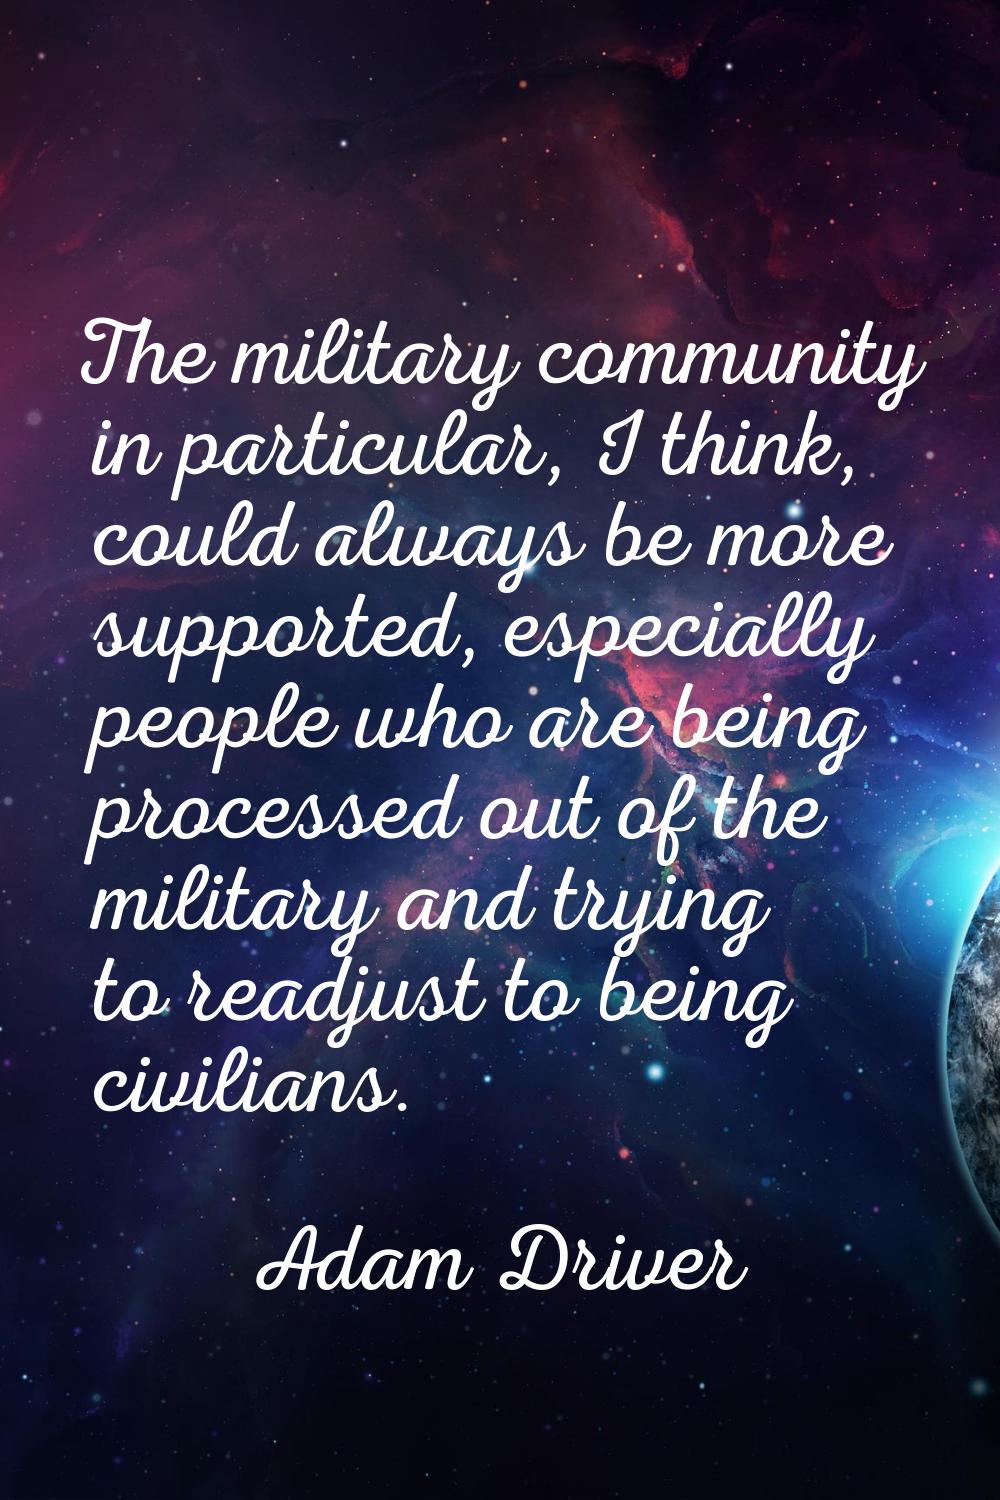 The military community in particular, I think, could always be more supported, especially people wh